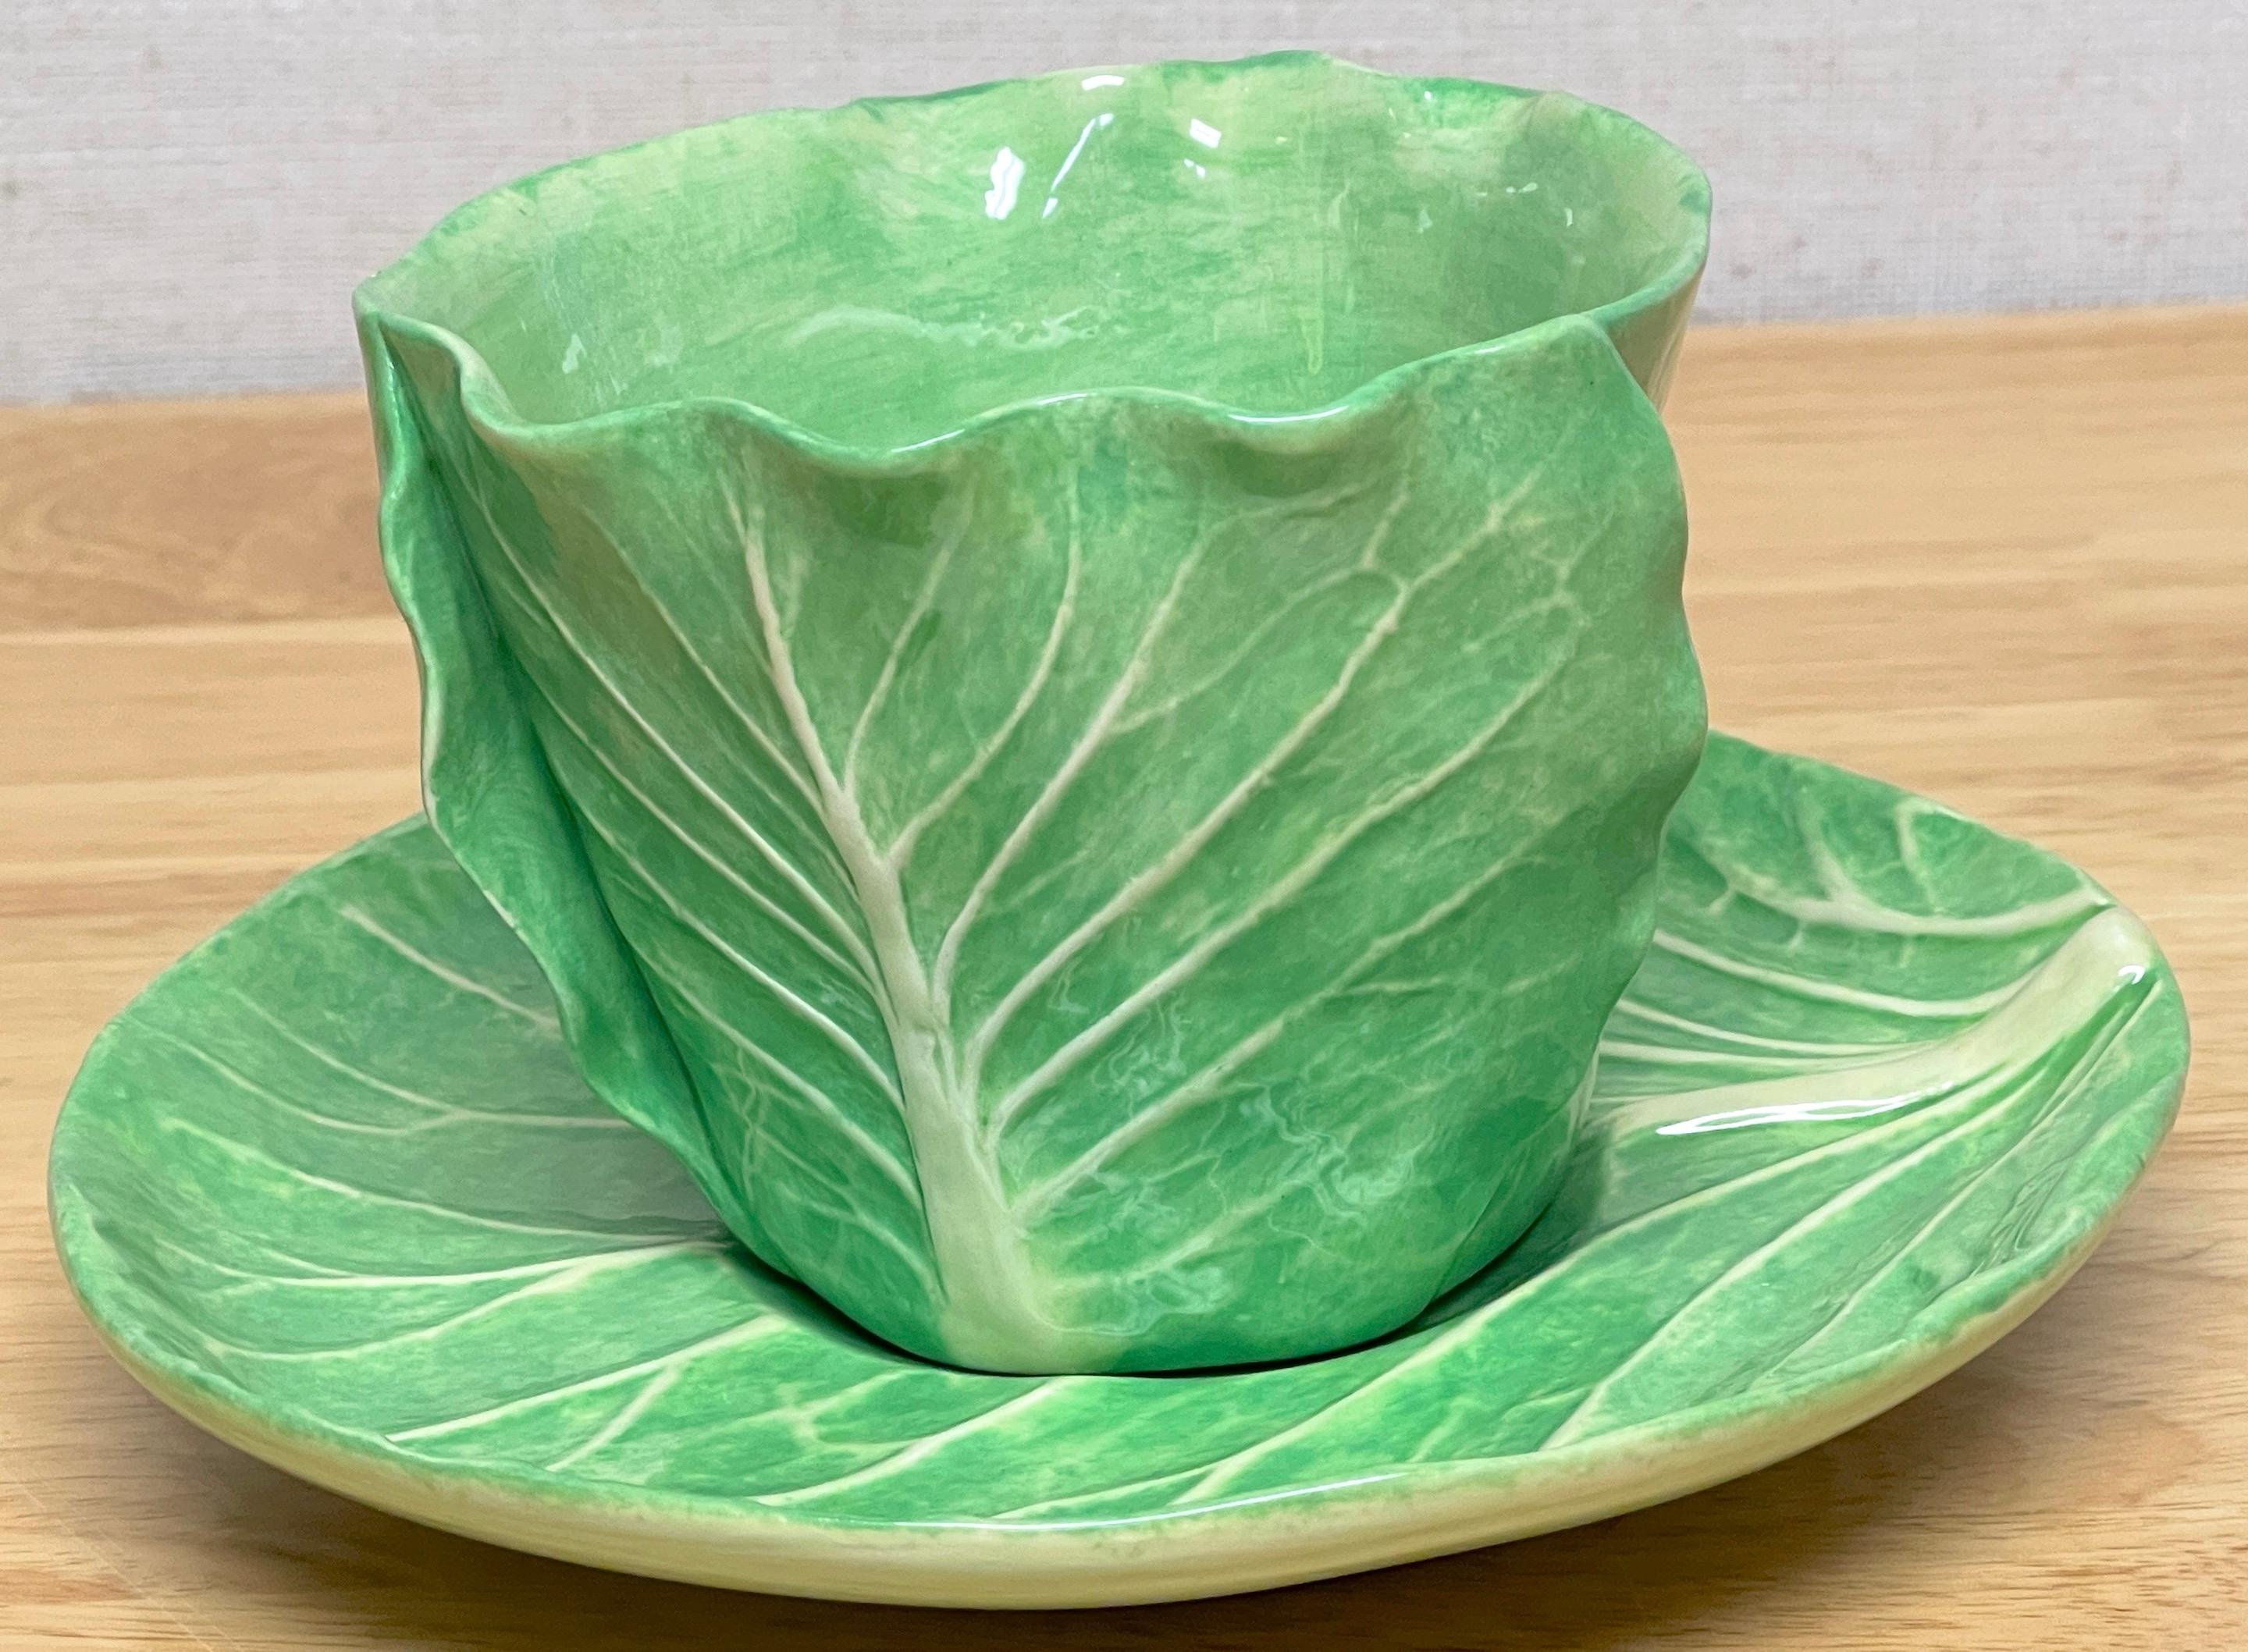 Dodie Thayer 'Jumbo' Lettuce Leaf Cup & Saucer, 5 Available, Sold Individually 3